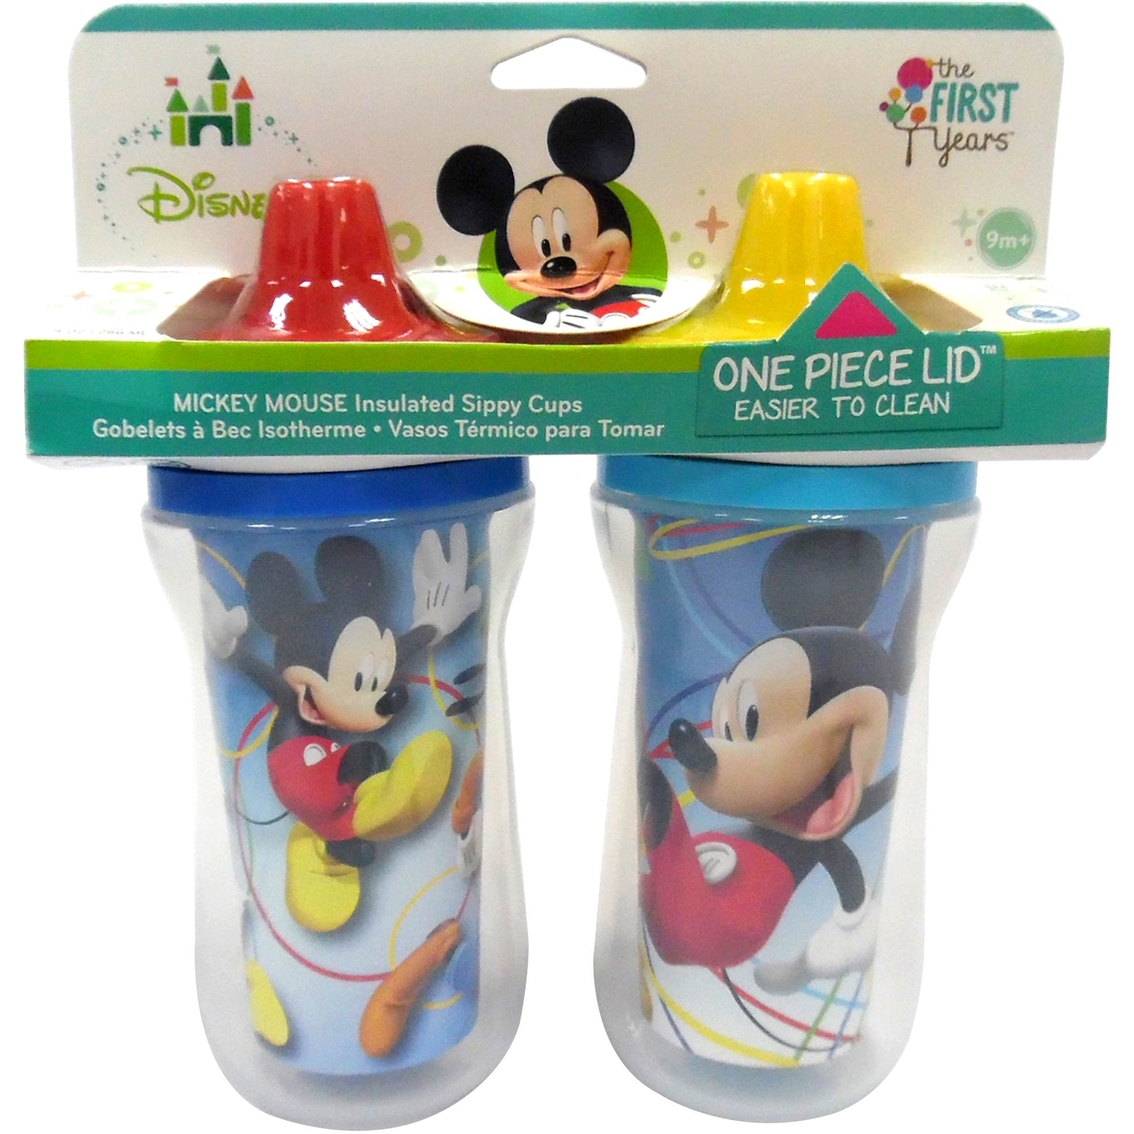 2 Ct 9 oz The First Years Disney Insulated Sippy Cup Mickey Mouse 